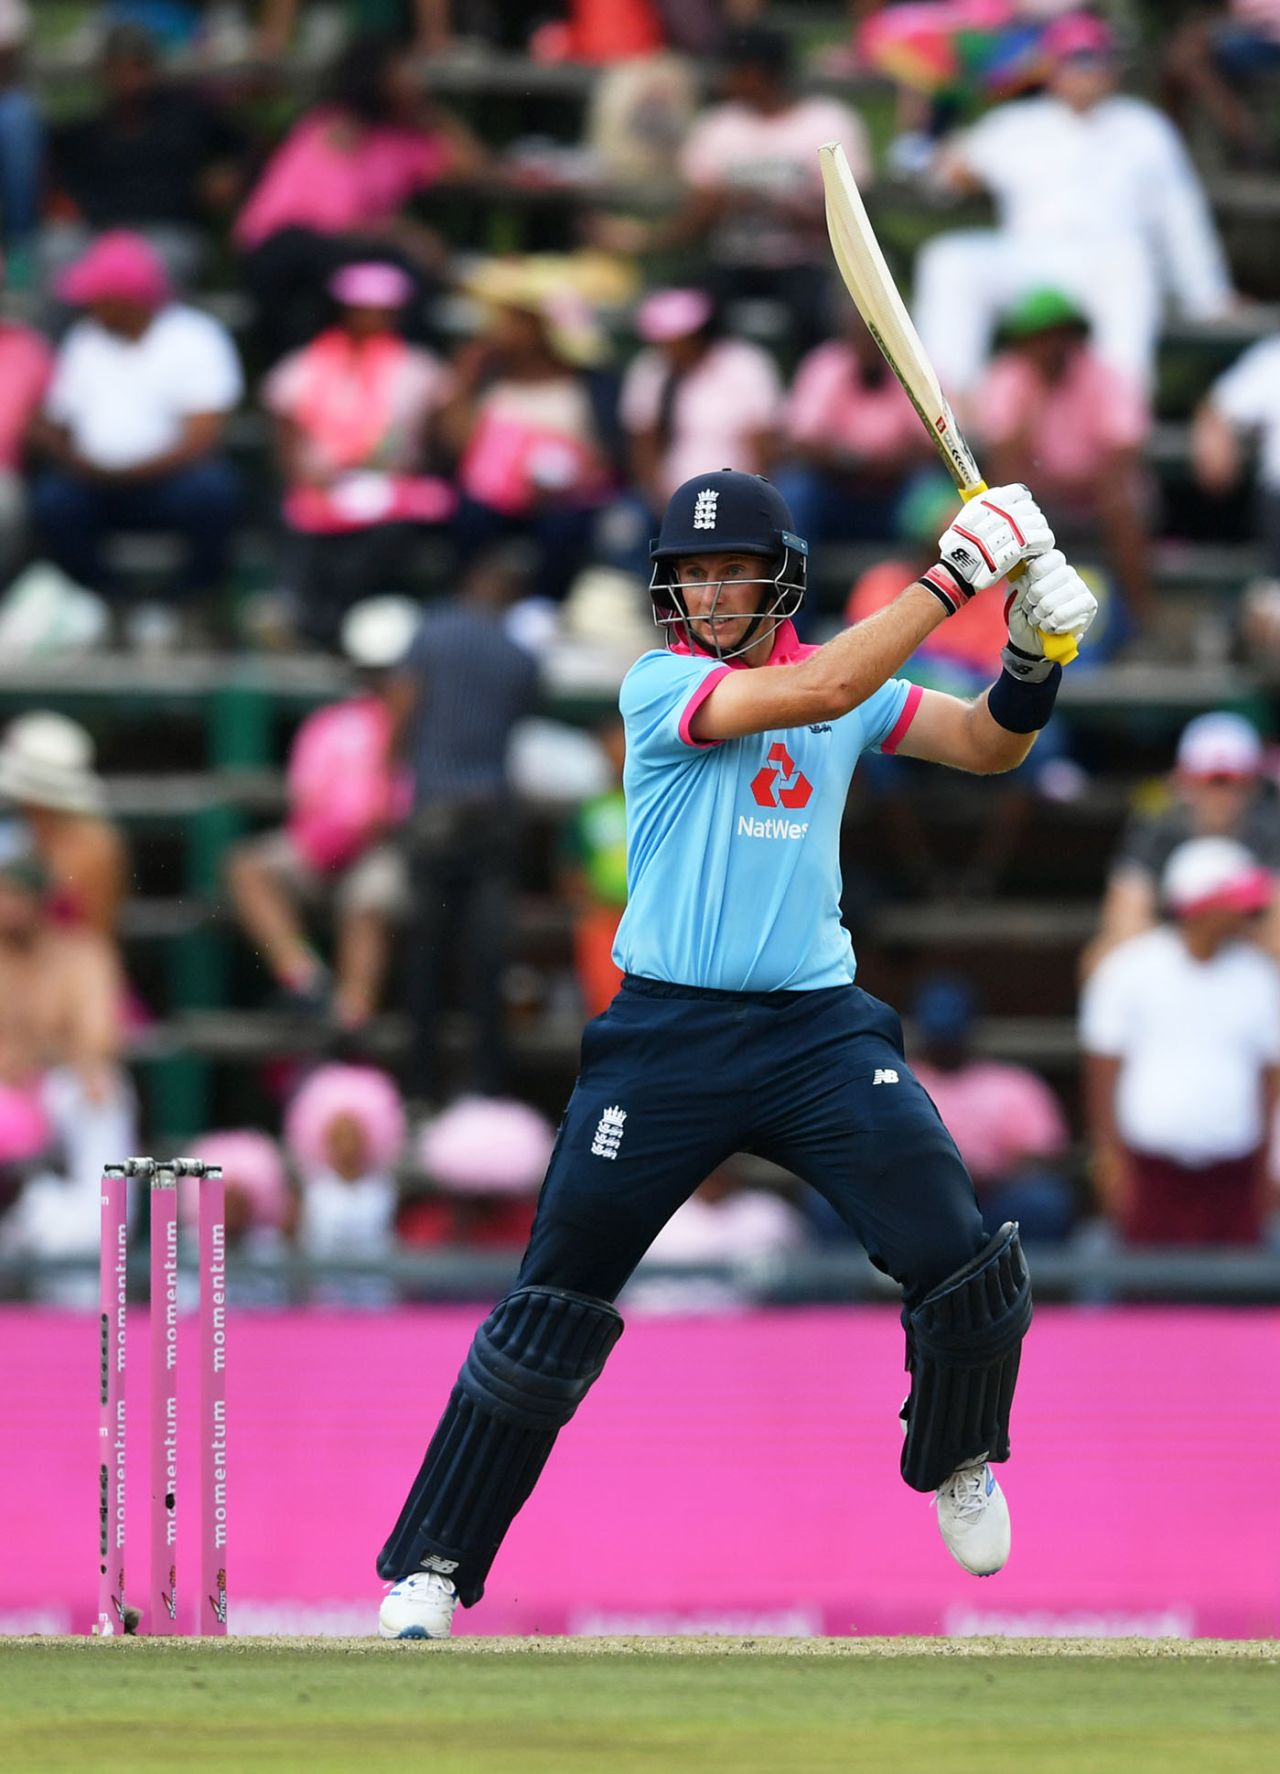 Joe Root cuts during his innings of 49, South Africa v England, 3rd ODI, Johannesburg, February 9, 2019